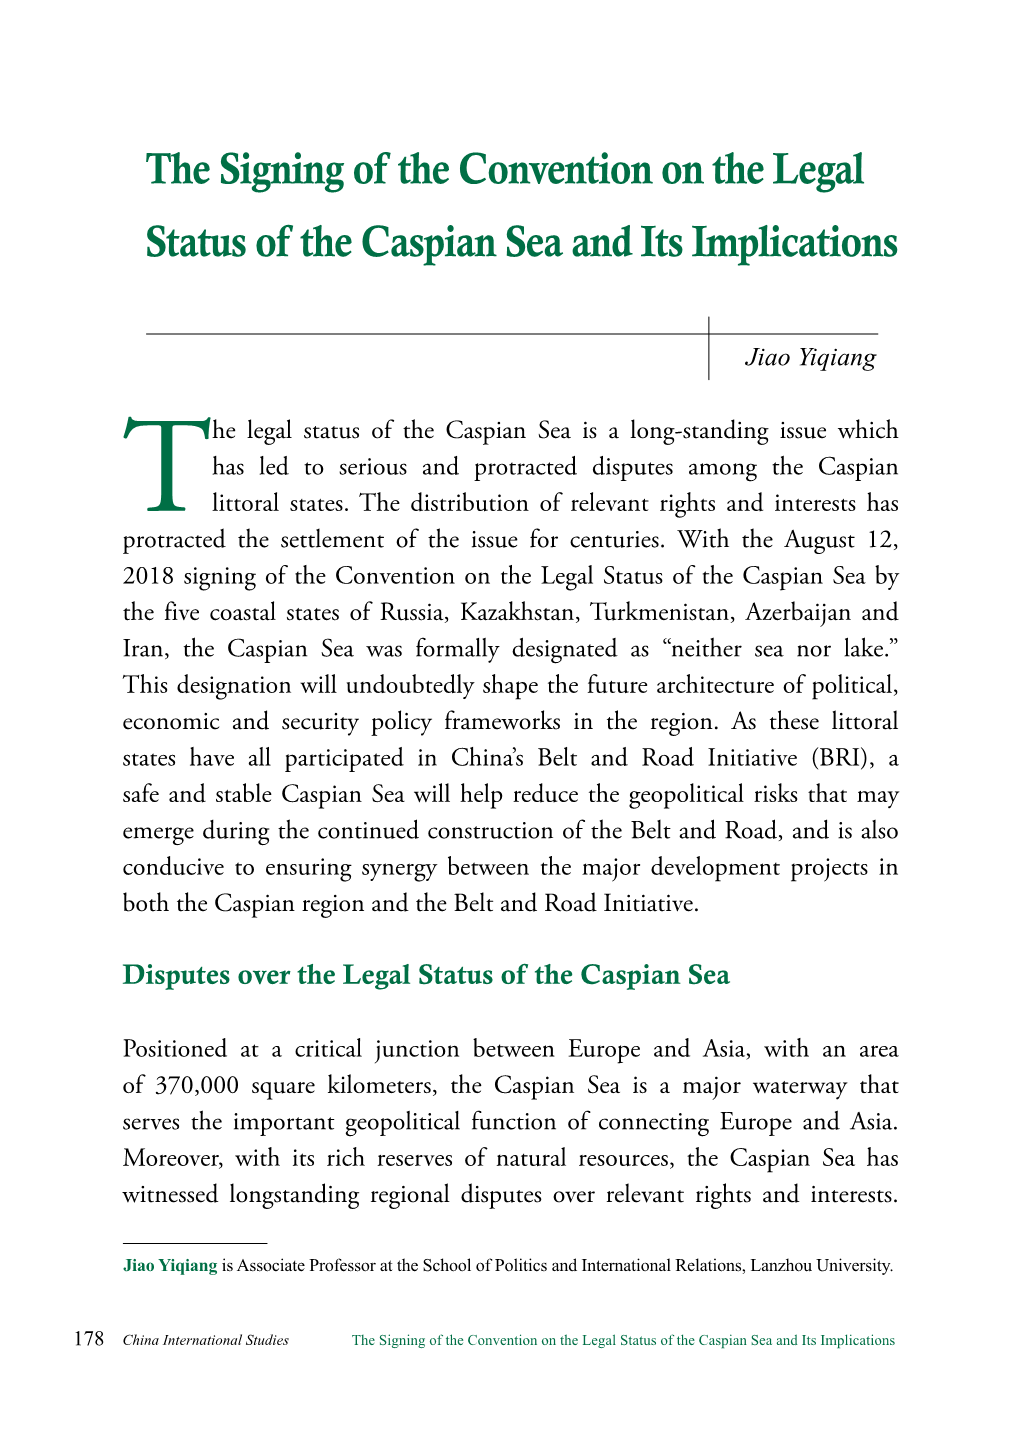 The Signing of the Convention on the Legal Status of the Caspian Sea and Its Implications